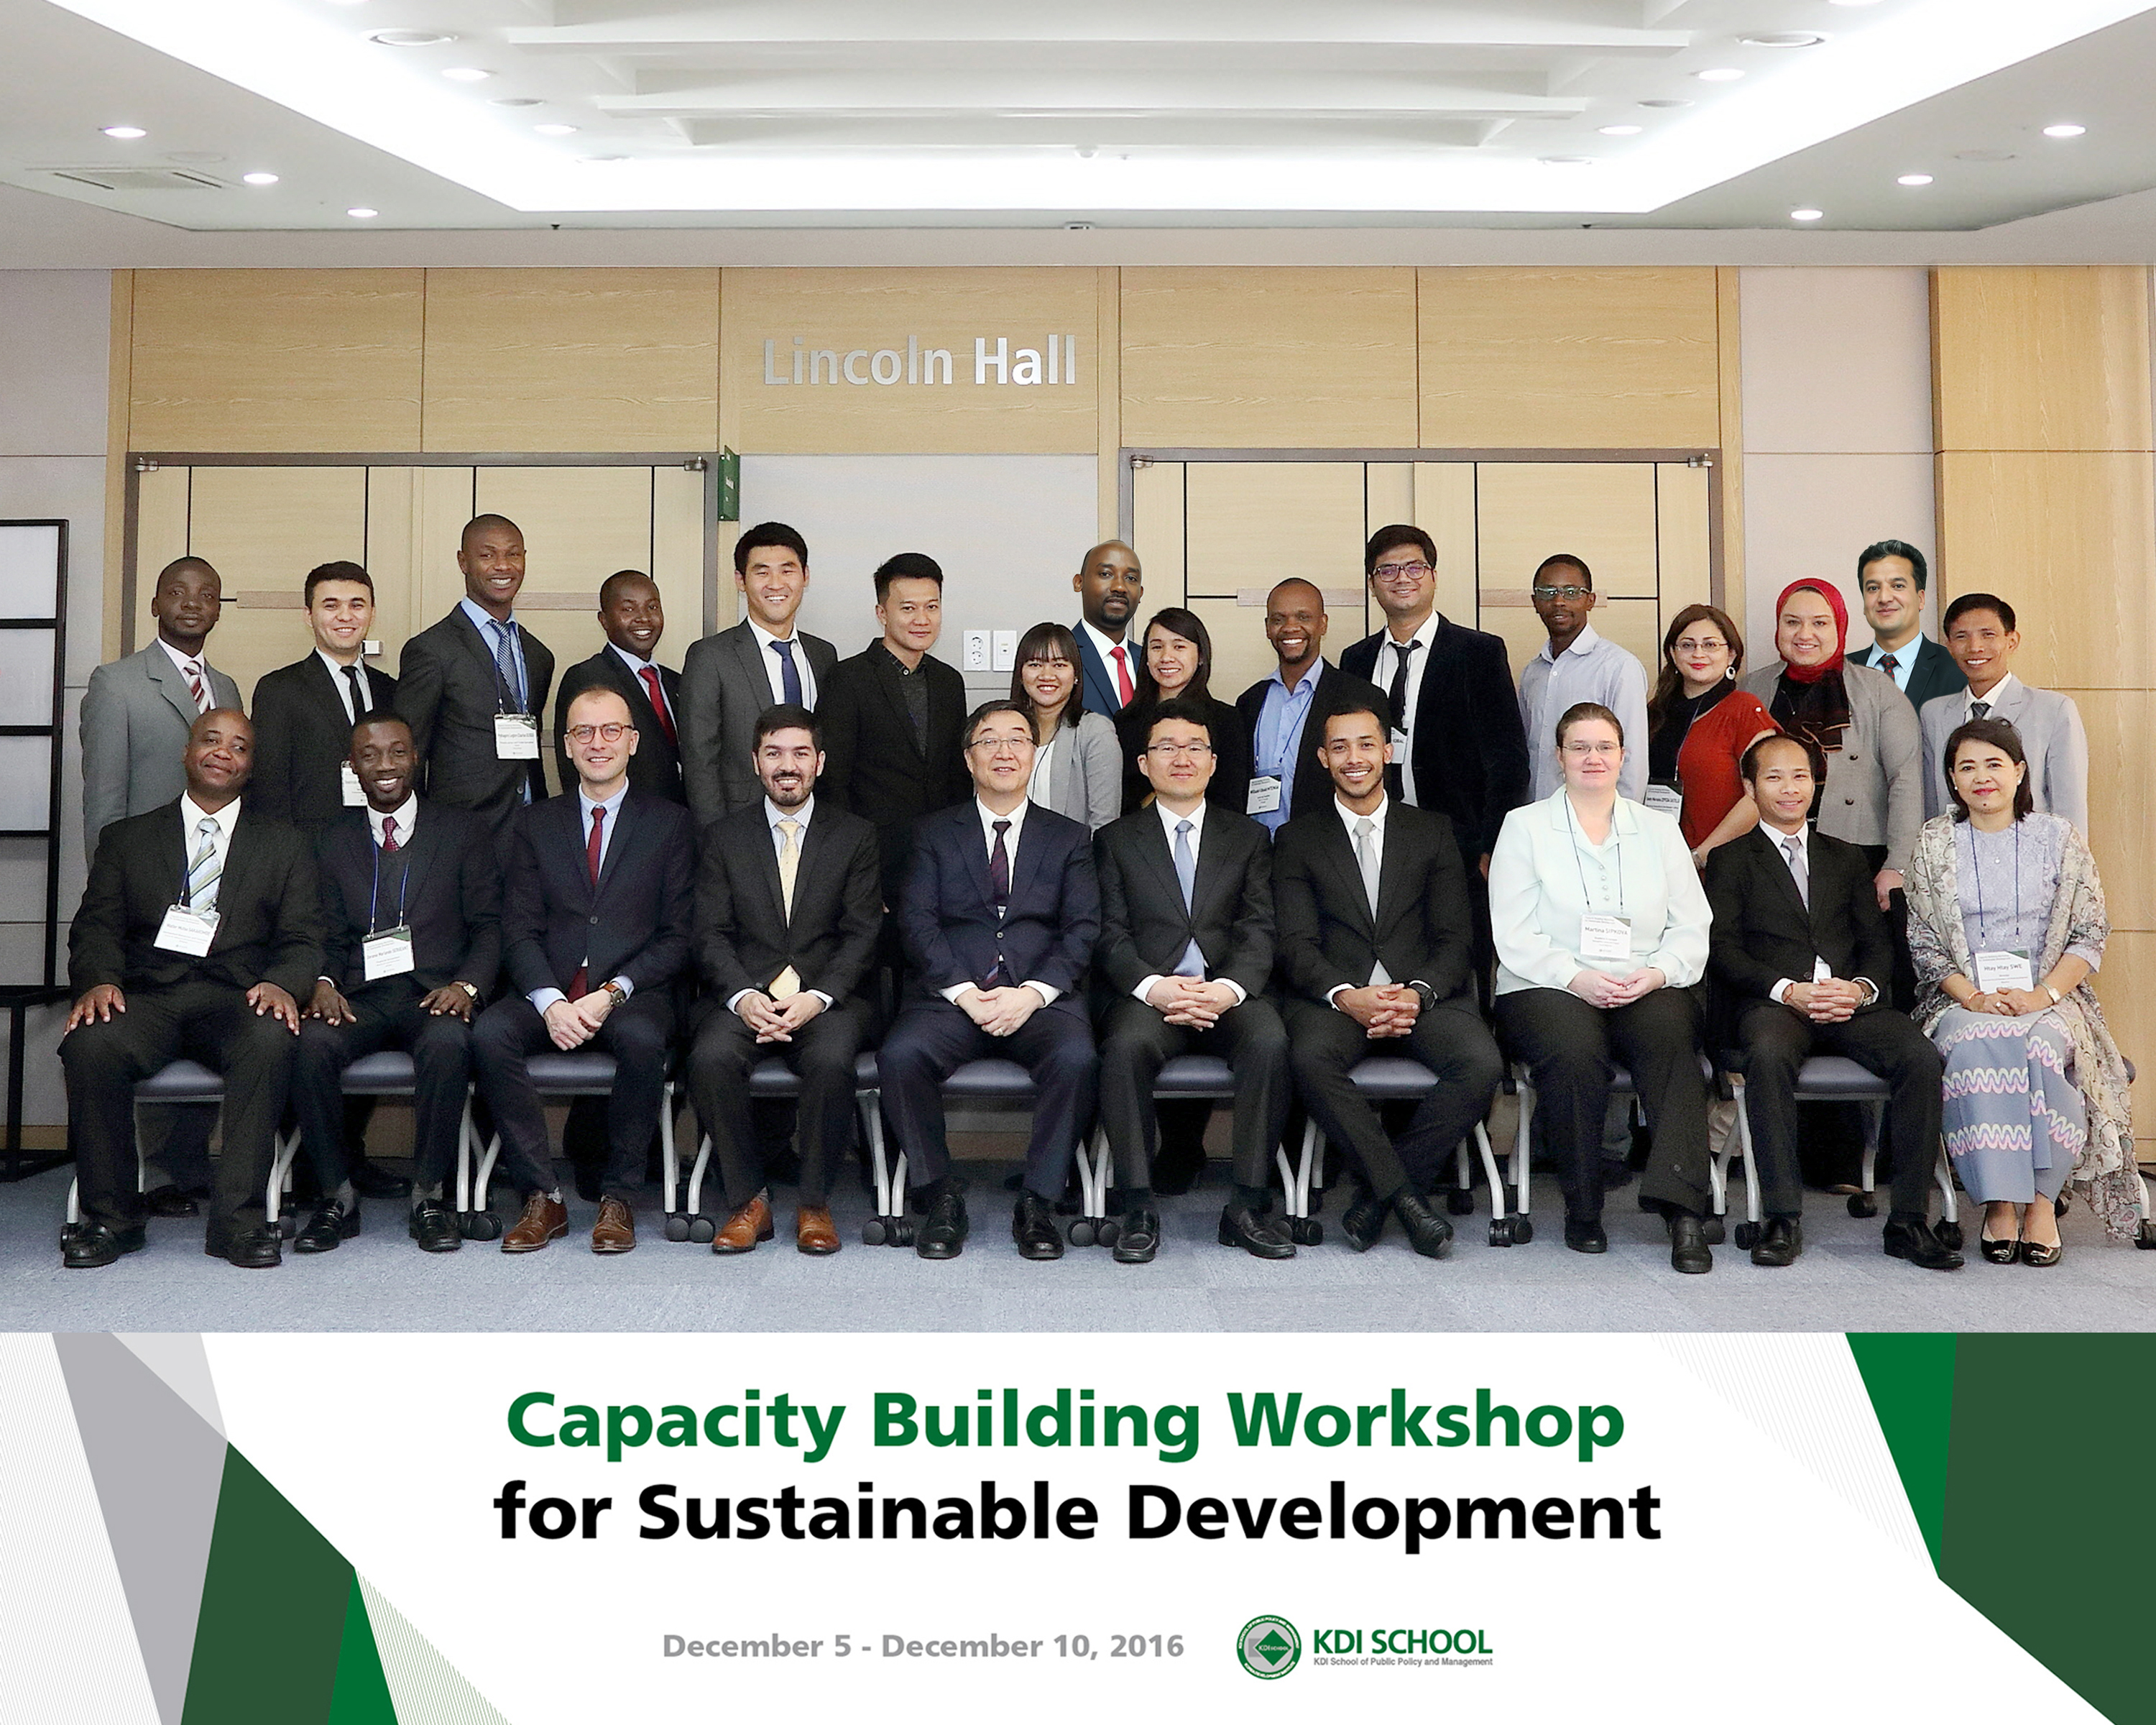 [Capacity Building Workshop for Sustainable Development]